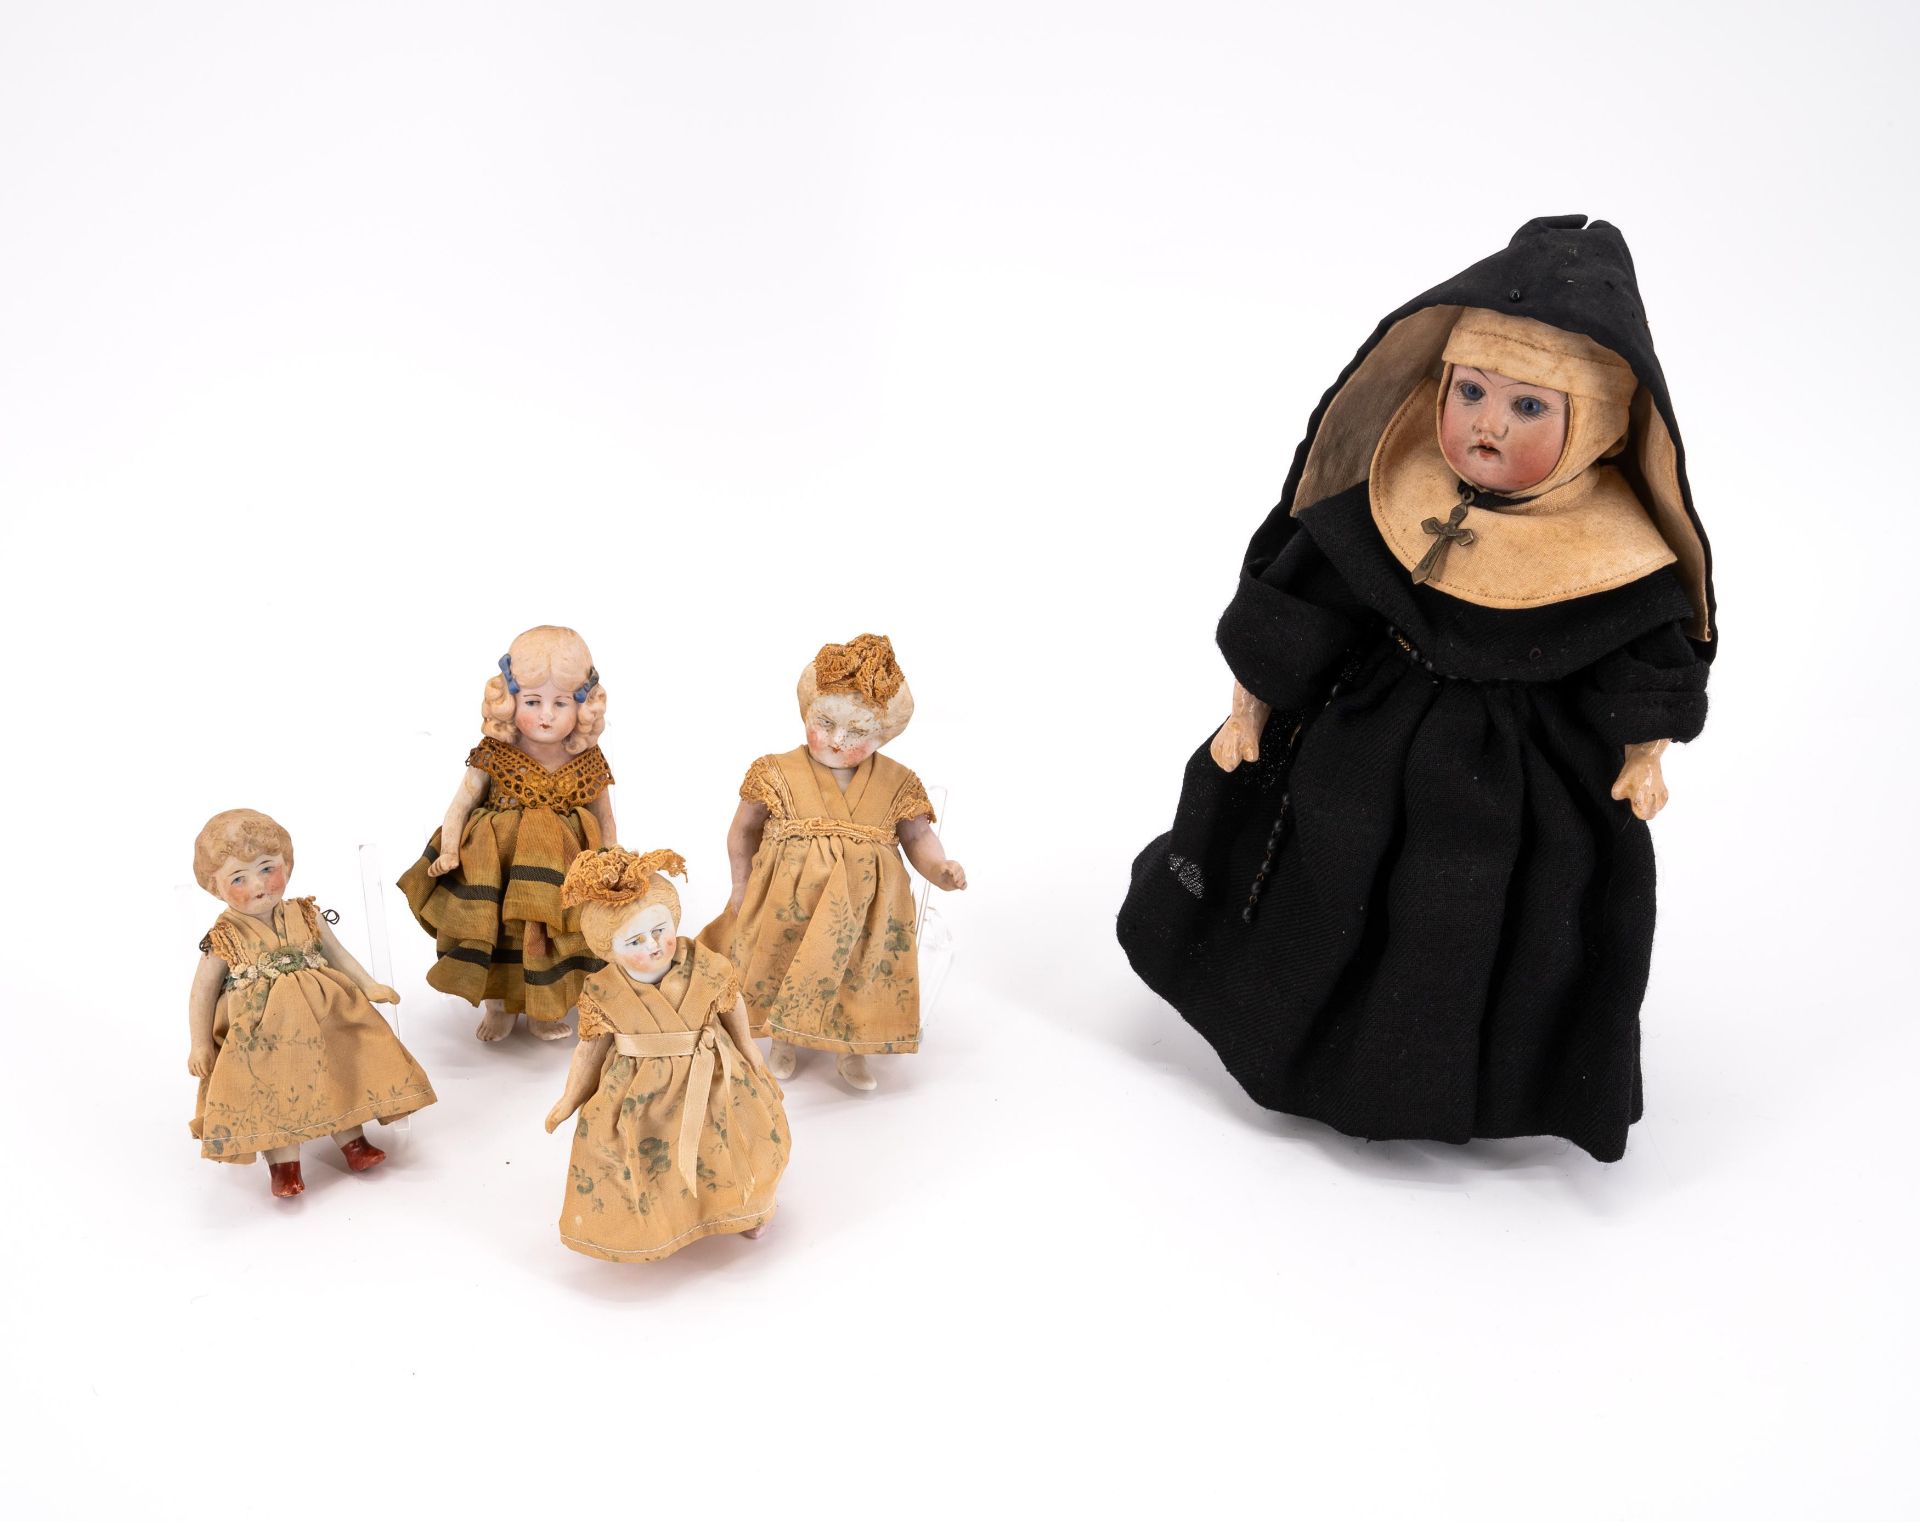 DOLL IN NUN'S HABIT, FOUR BISQUE PORCELAIN HEAD DOLLS AND A DOLL'S HEAD MADE OF PORCELAIN, TEXTILE, 